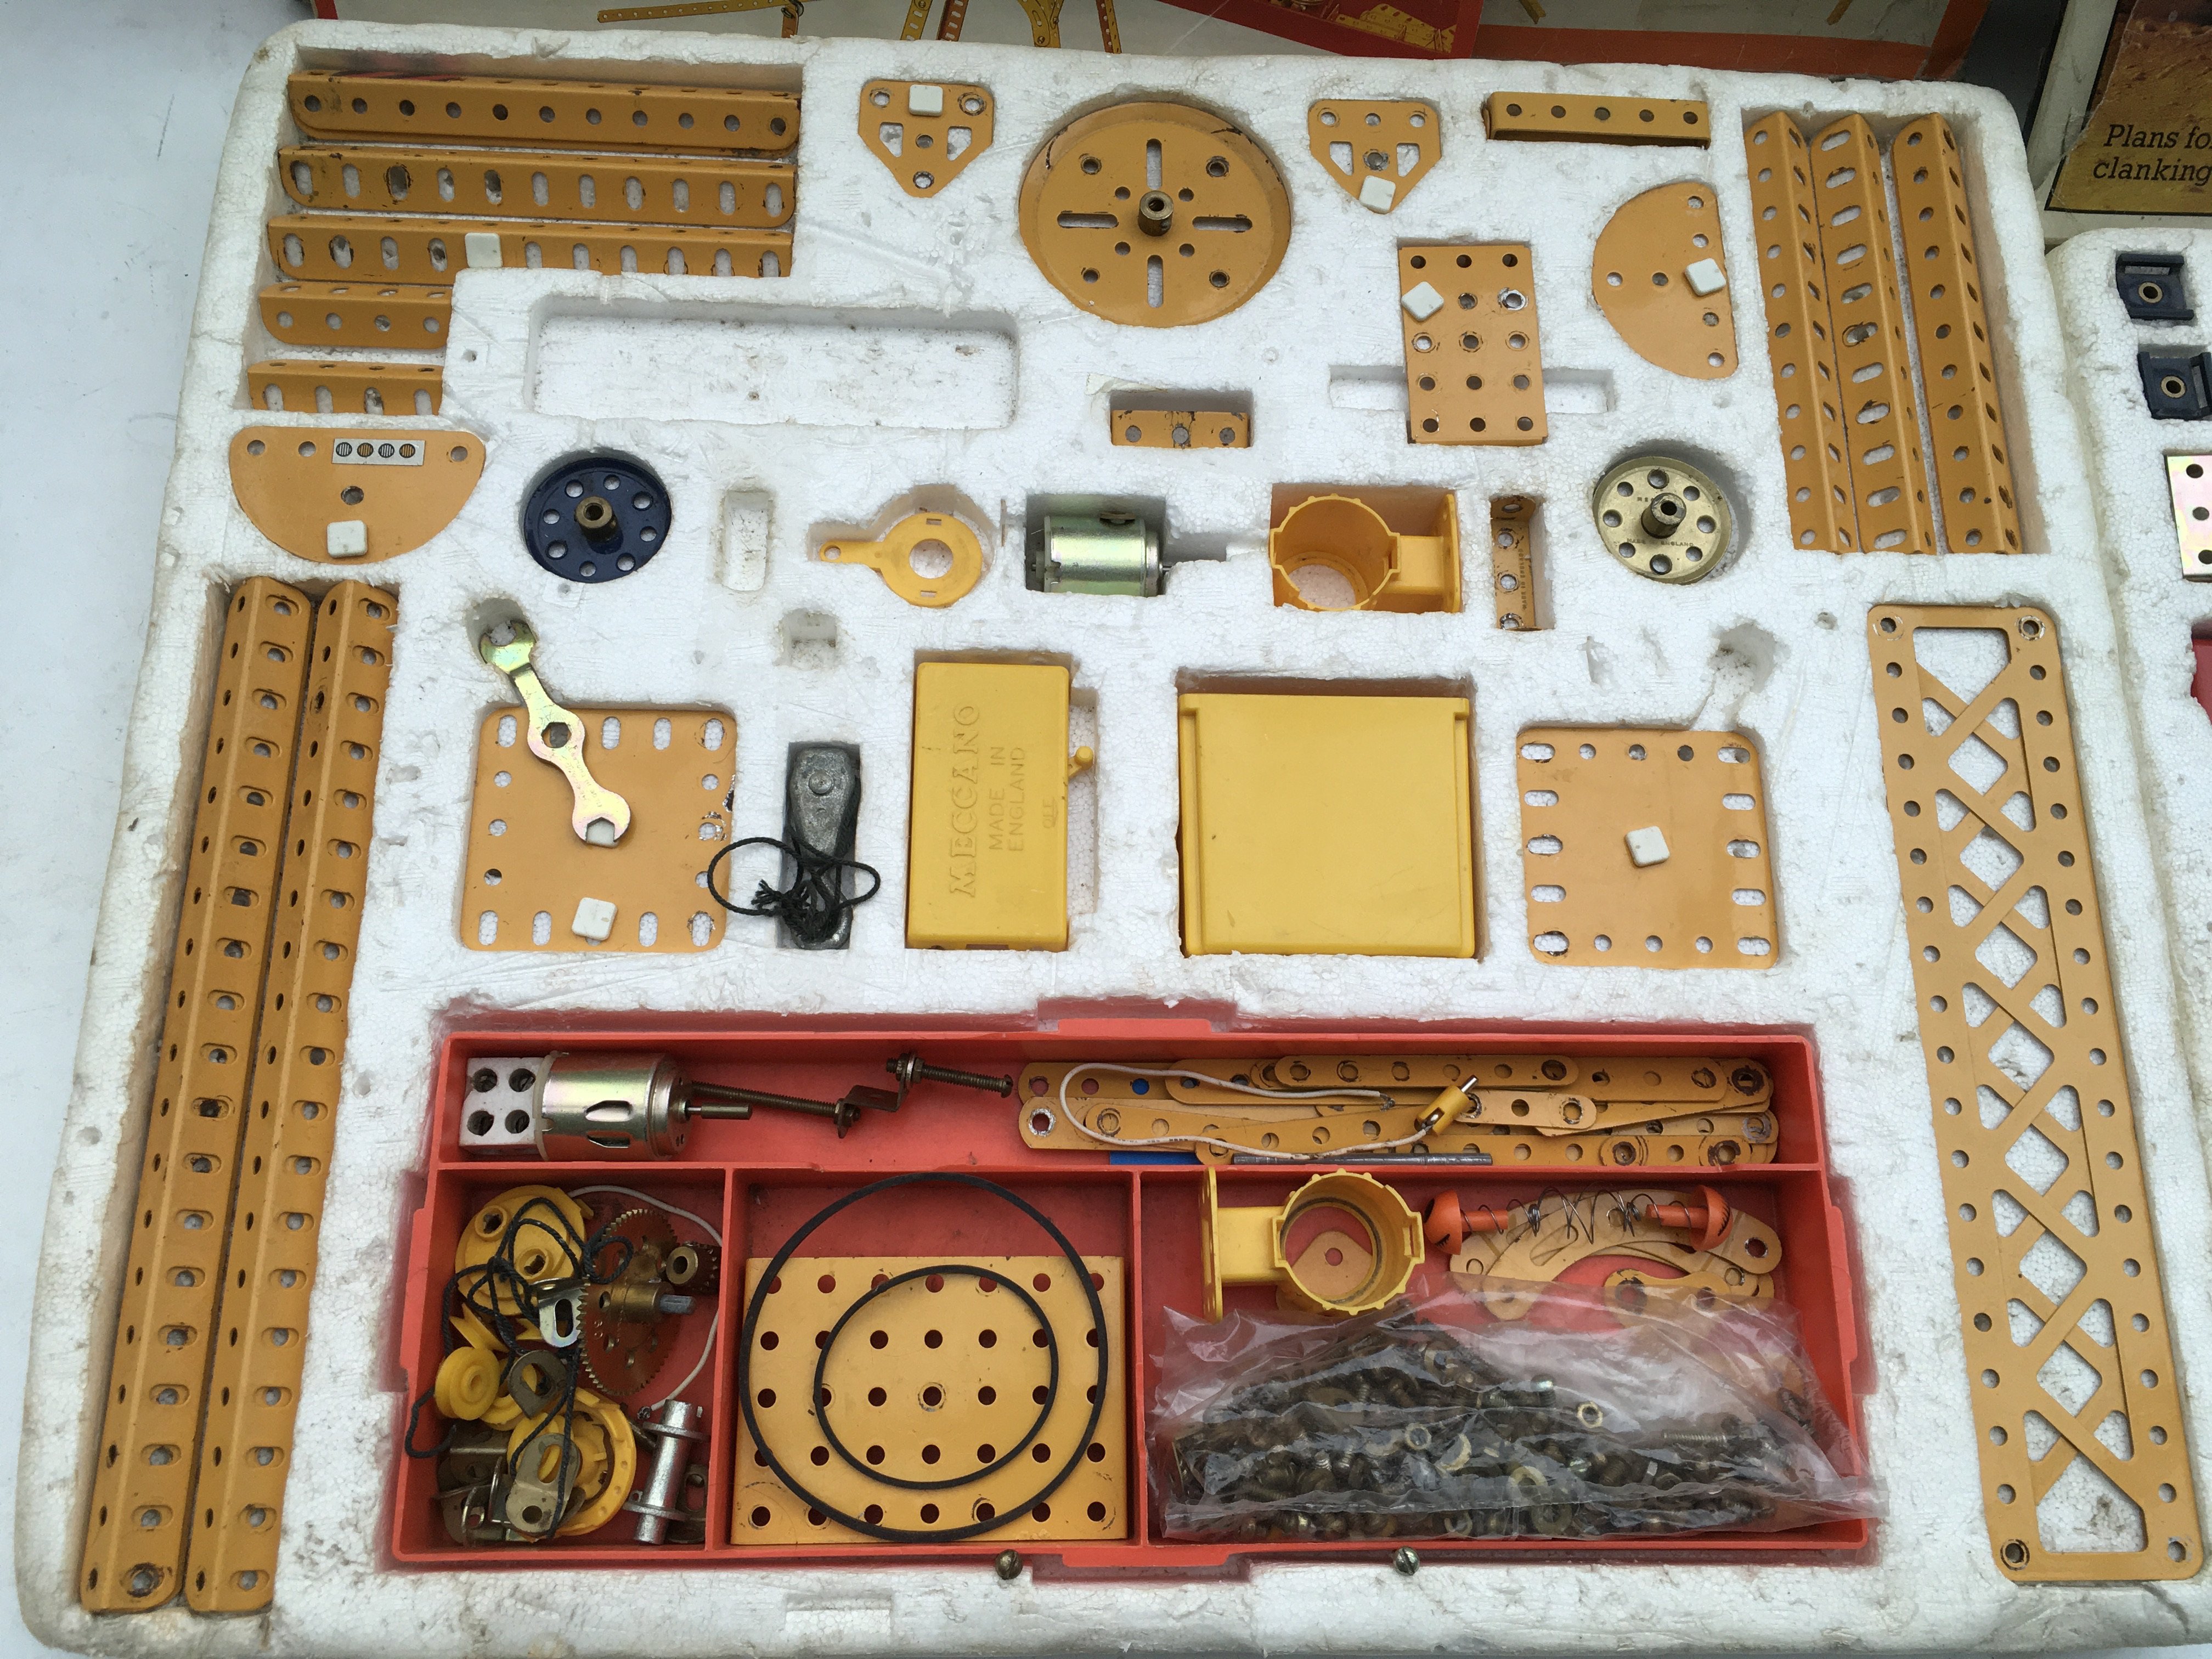 Meccano sets, boxed including Crane construction set motorised and Meccanoids from Deep Space also - Image 2 of 3